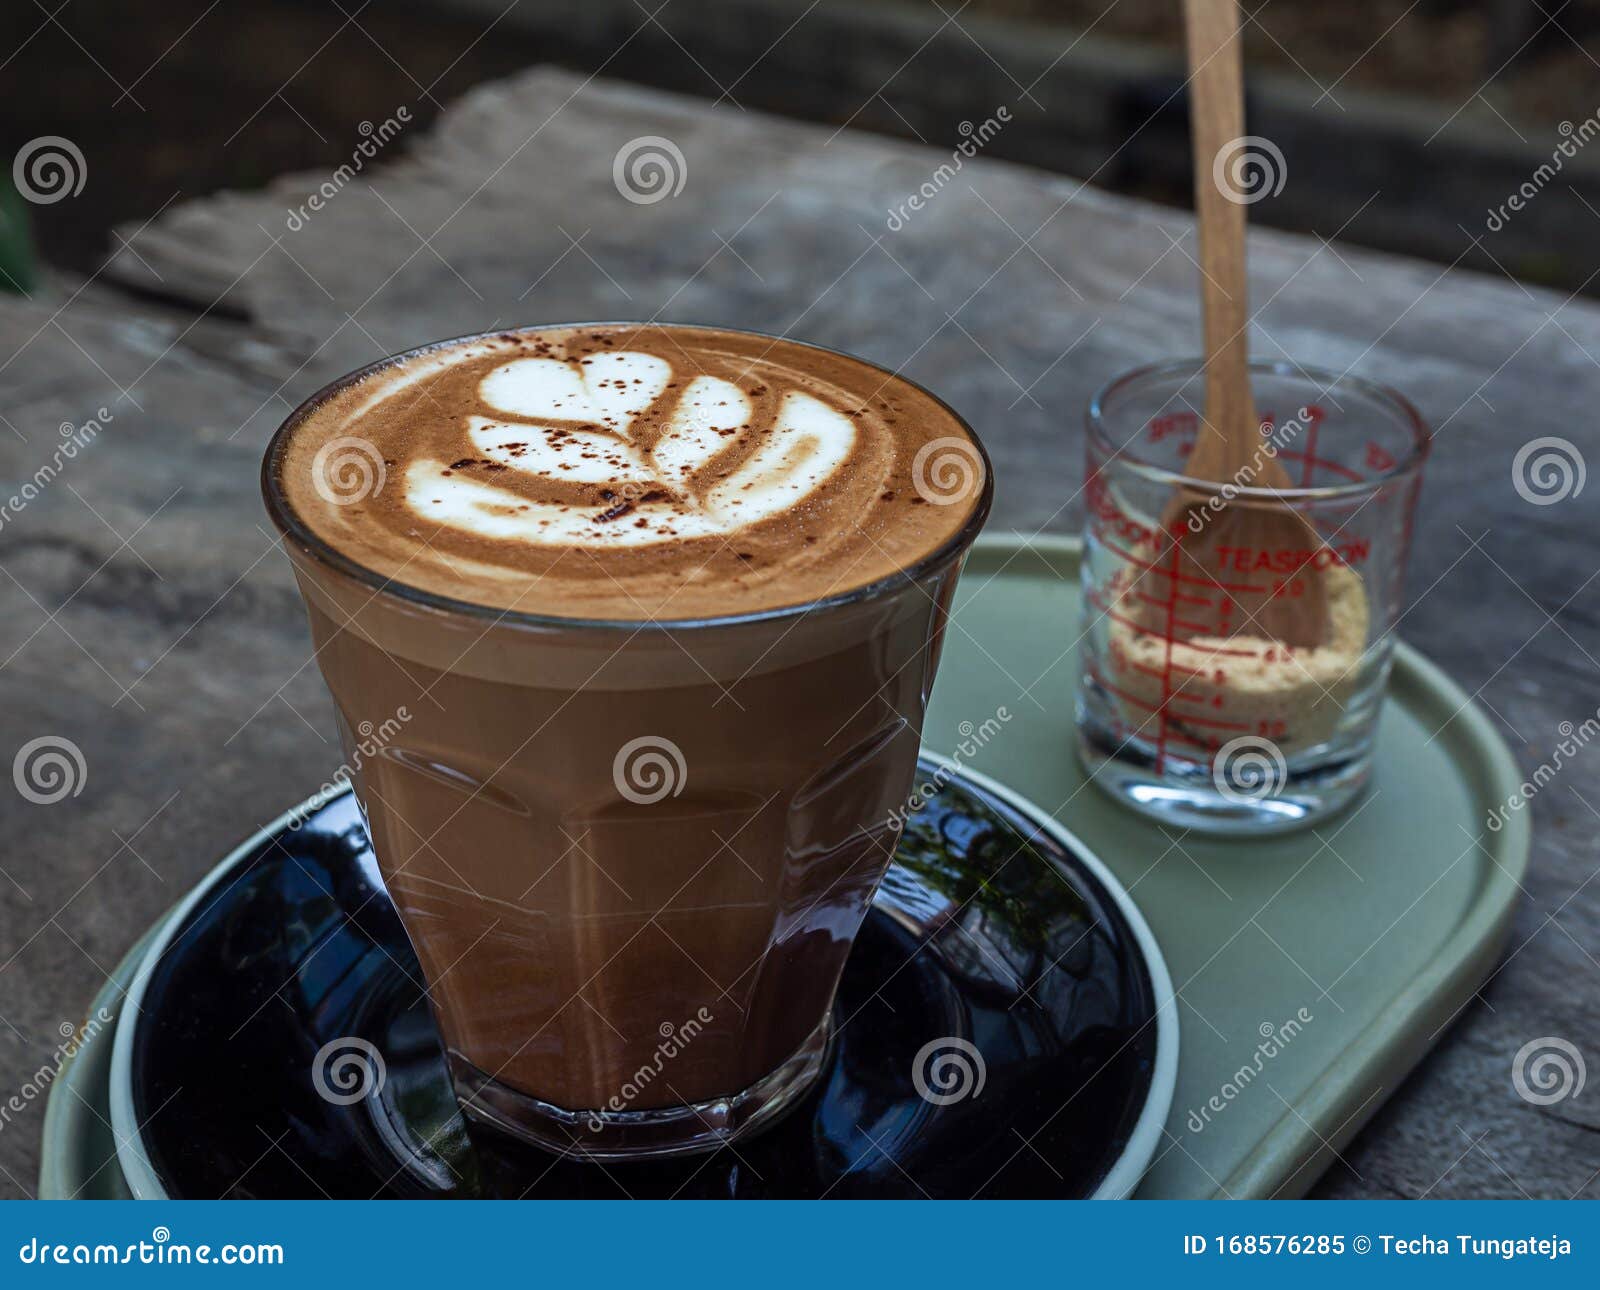 mocha coffee on wooden table background